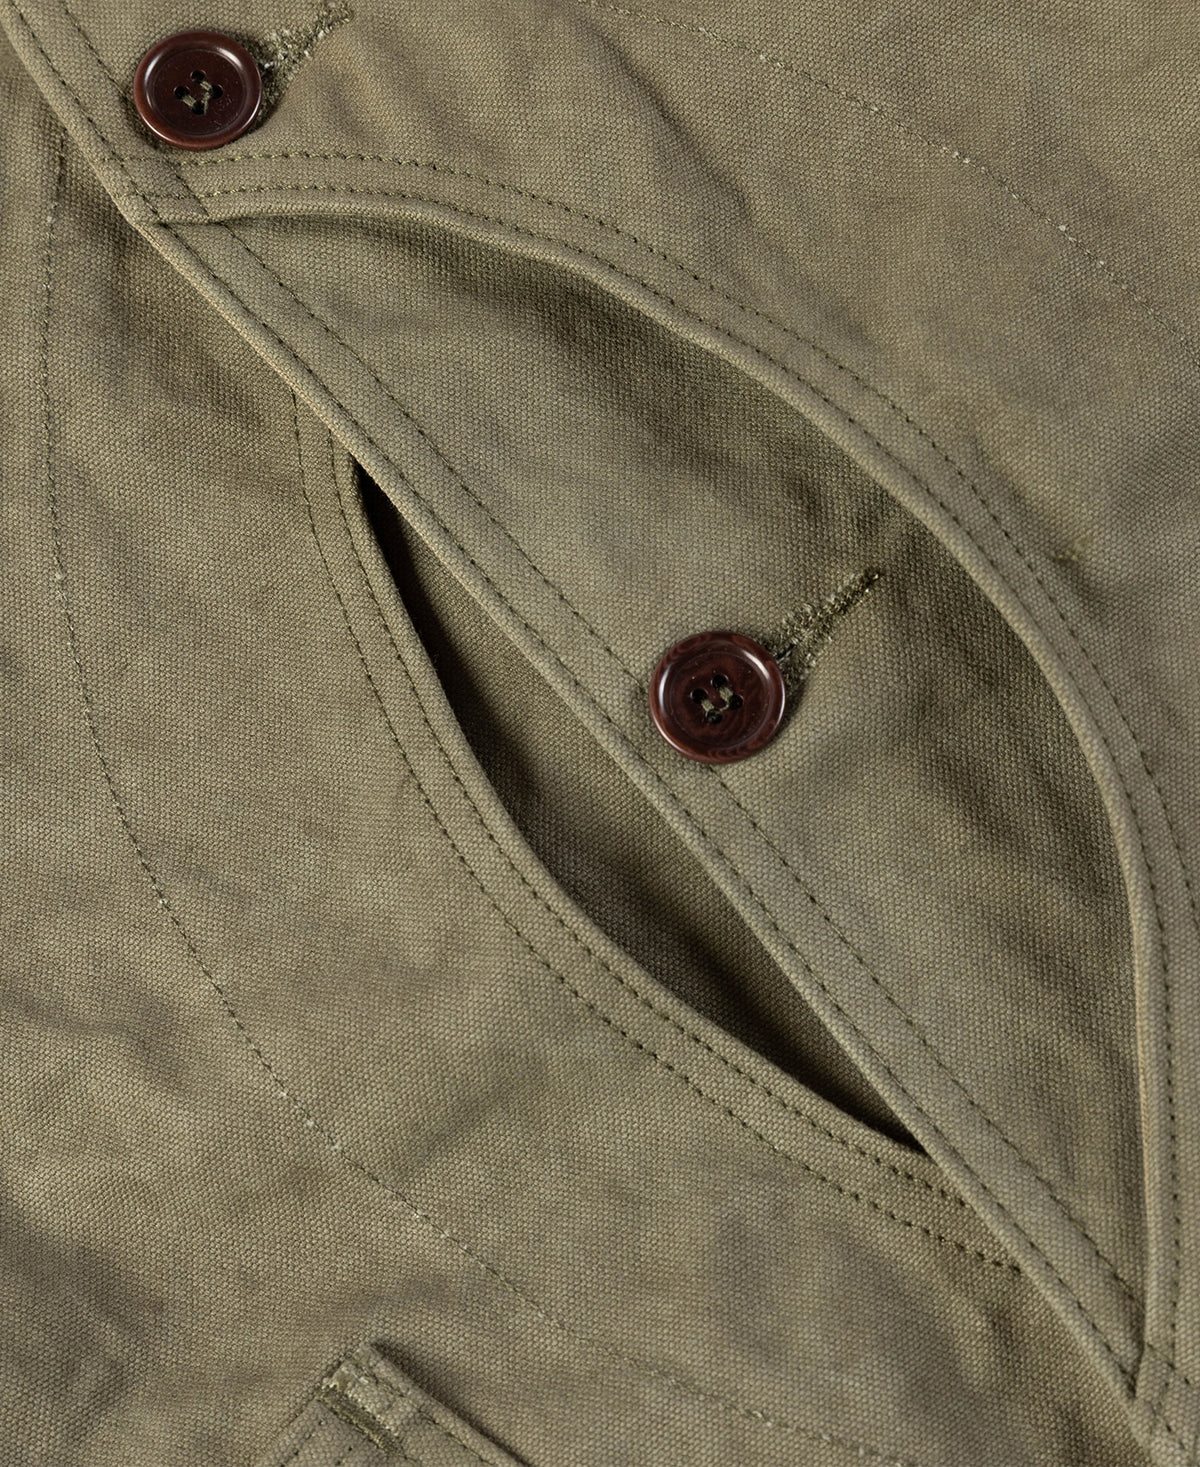 1930s Heavyweight Canvas Game Pocket Hunting Vest - Olive